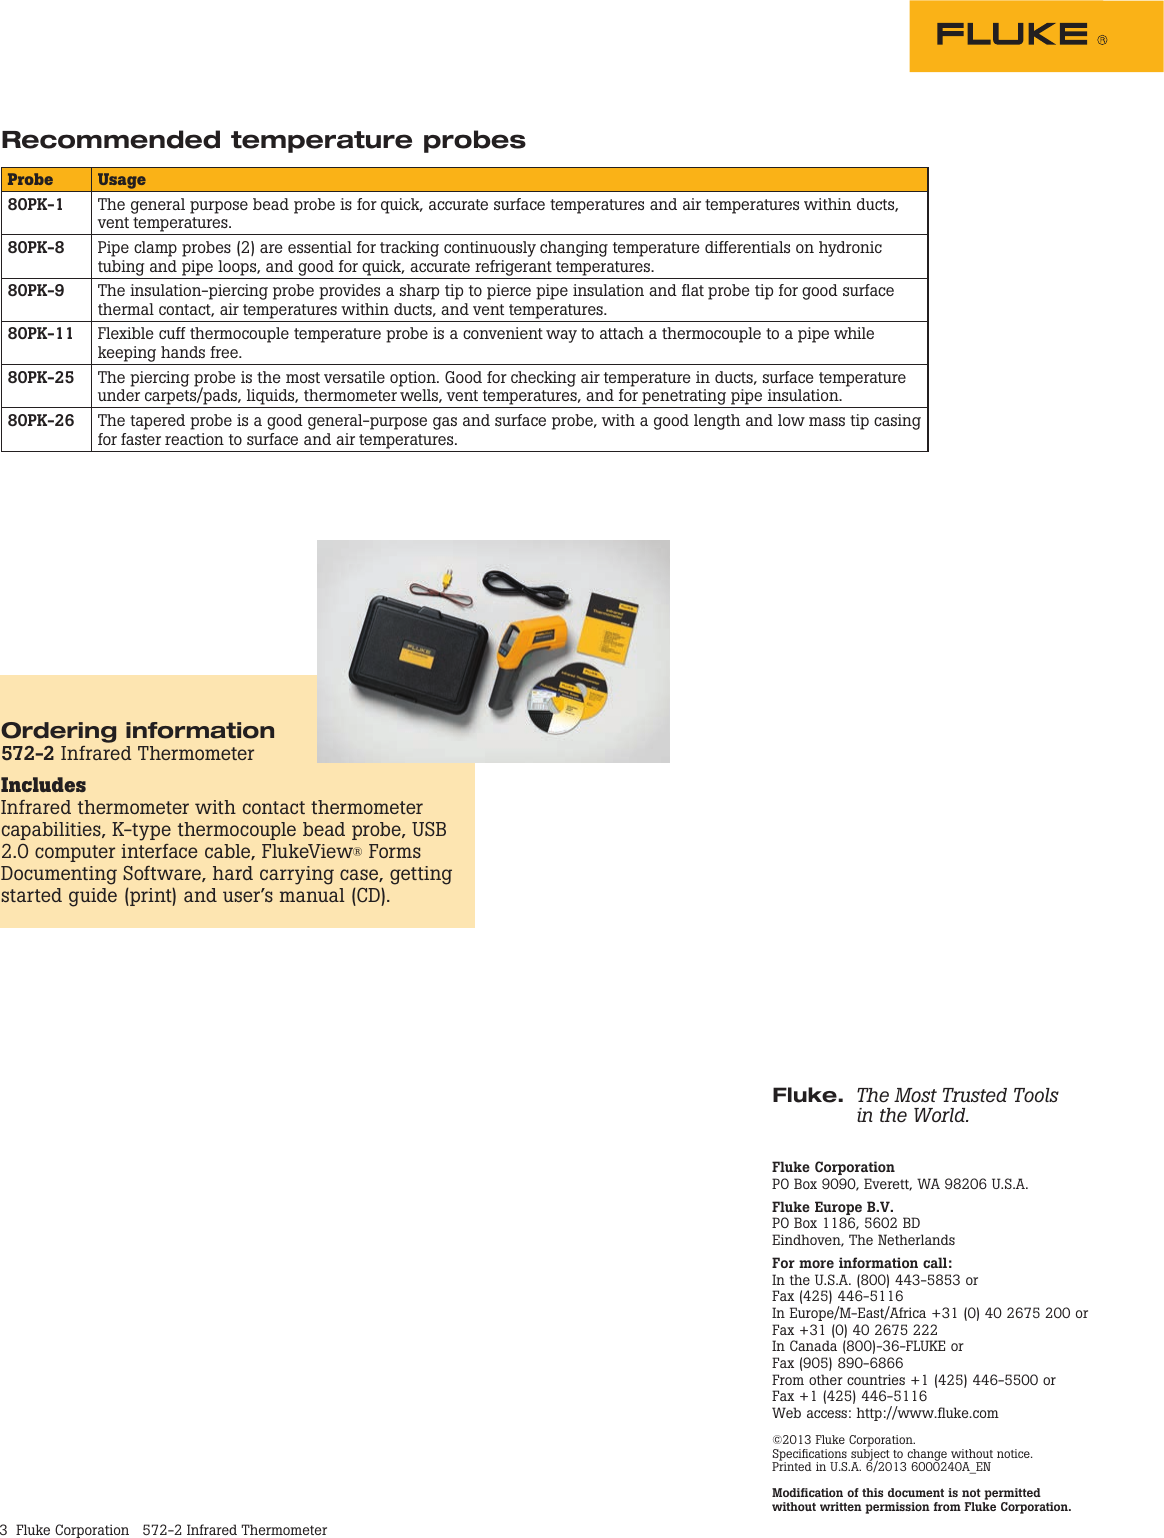 Page 3 of 3 - 572-2 Infrared Thermometer